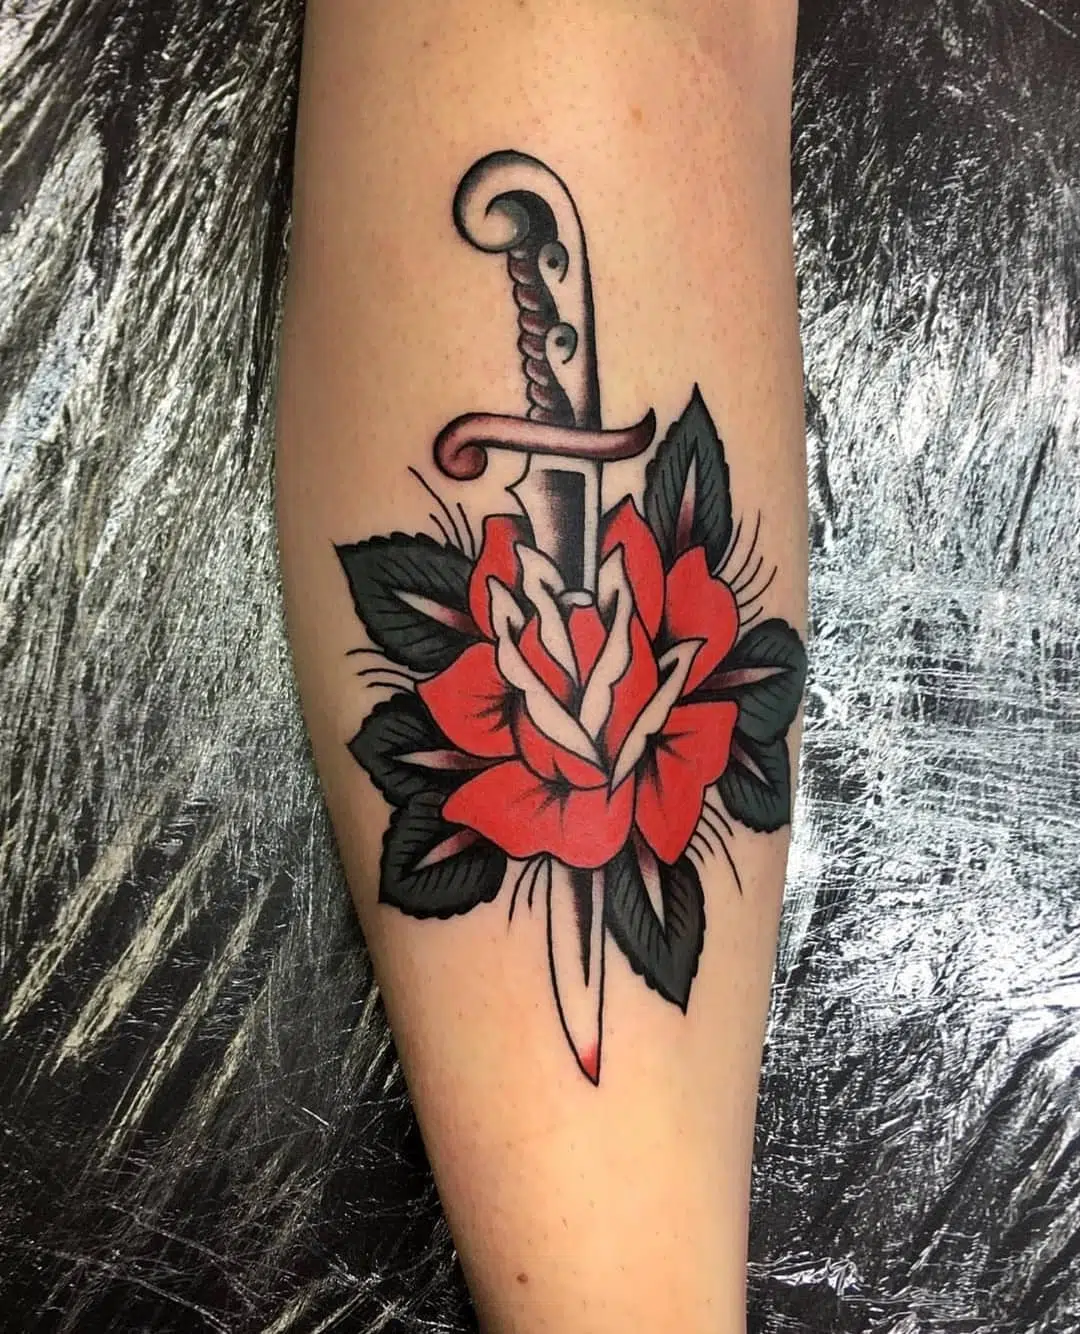 Dagger and rose by Sara Sempreverde at Watermelon Tattoo. Thanks so much for guesting with us, was lovely having you work in the shop!!! 